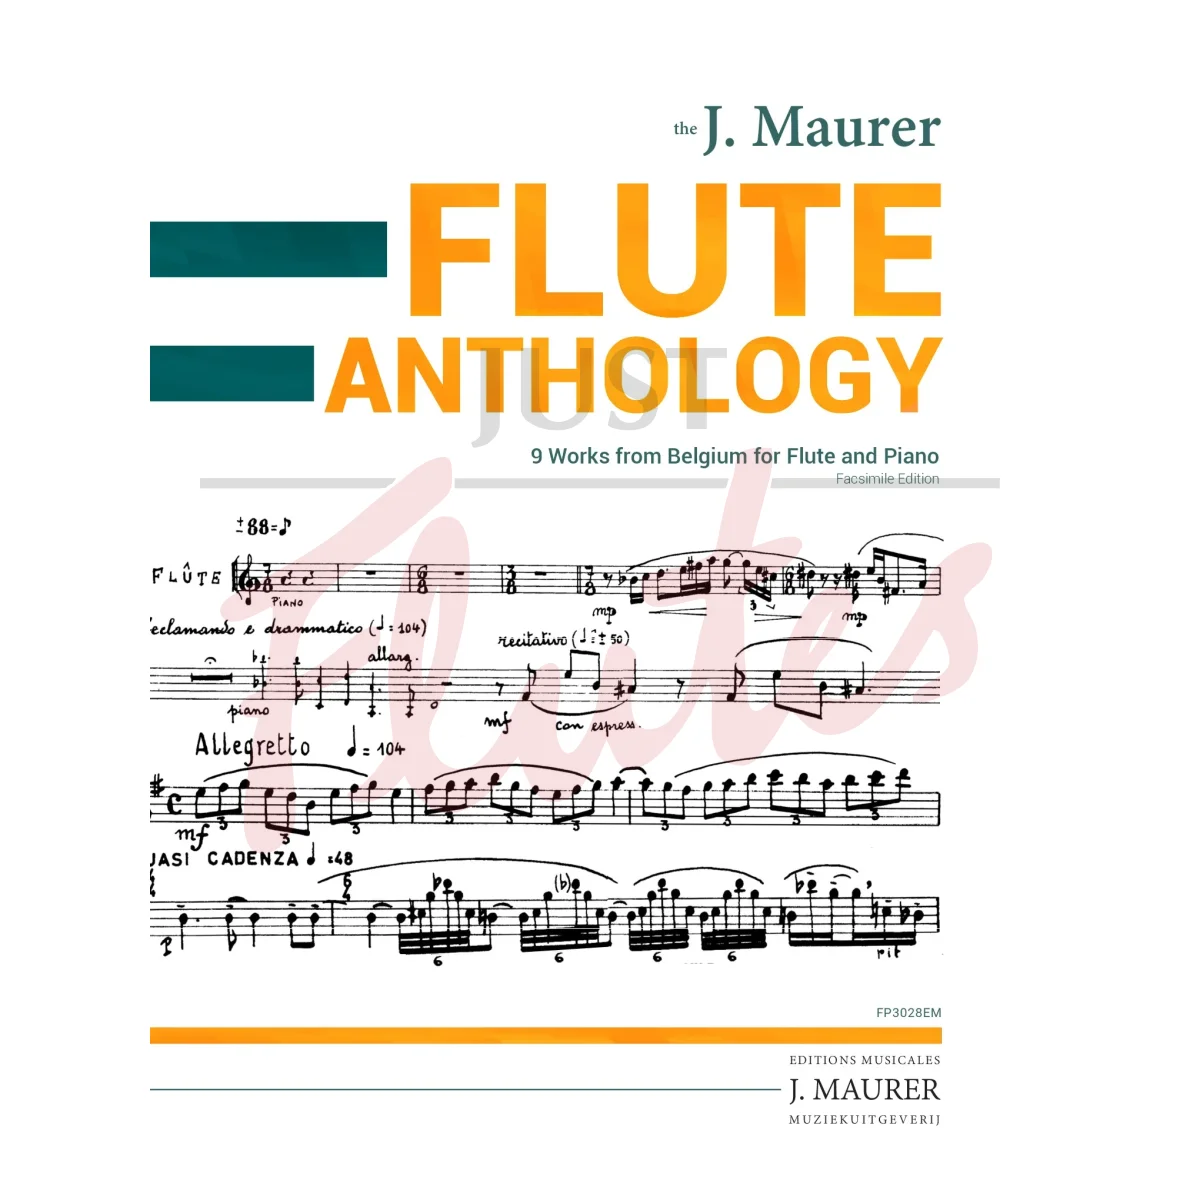 The J. Maurer Flute Anthology: 9 Works from Belgium for Flute and Piano